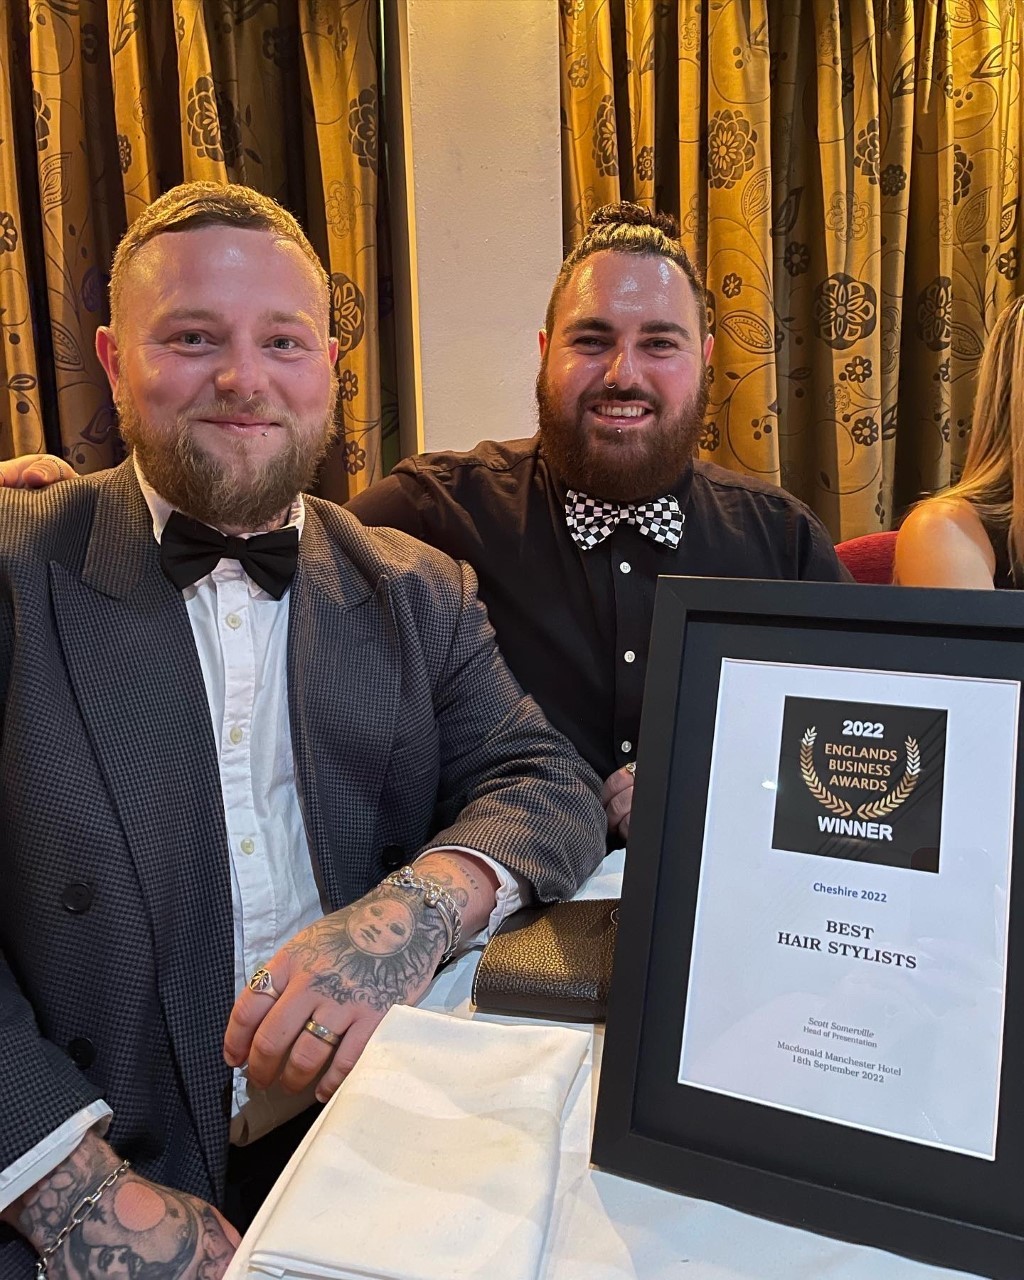 Chris and Mike won the award for Best Hair Stylists at Englands Business Awards 2022